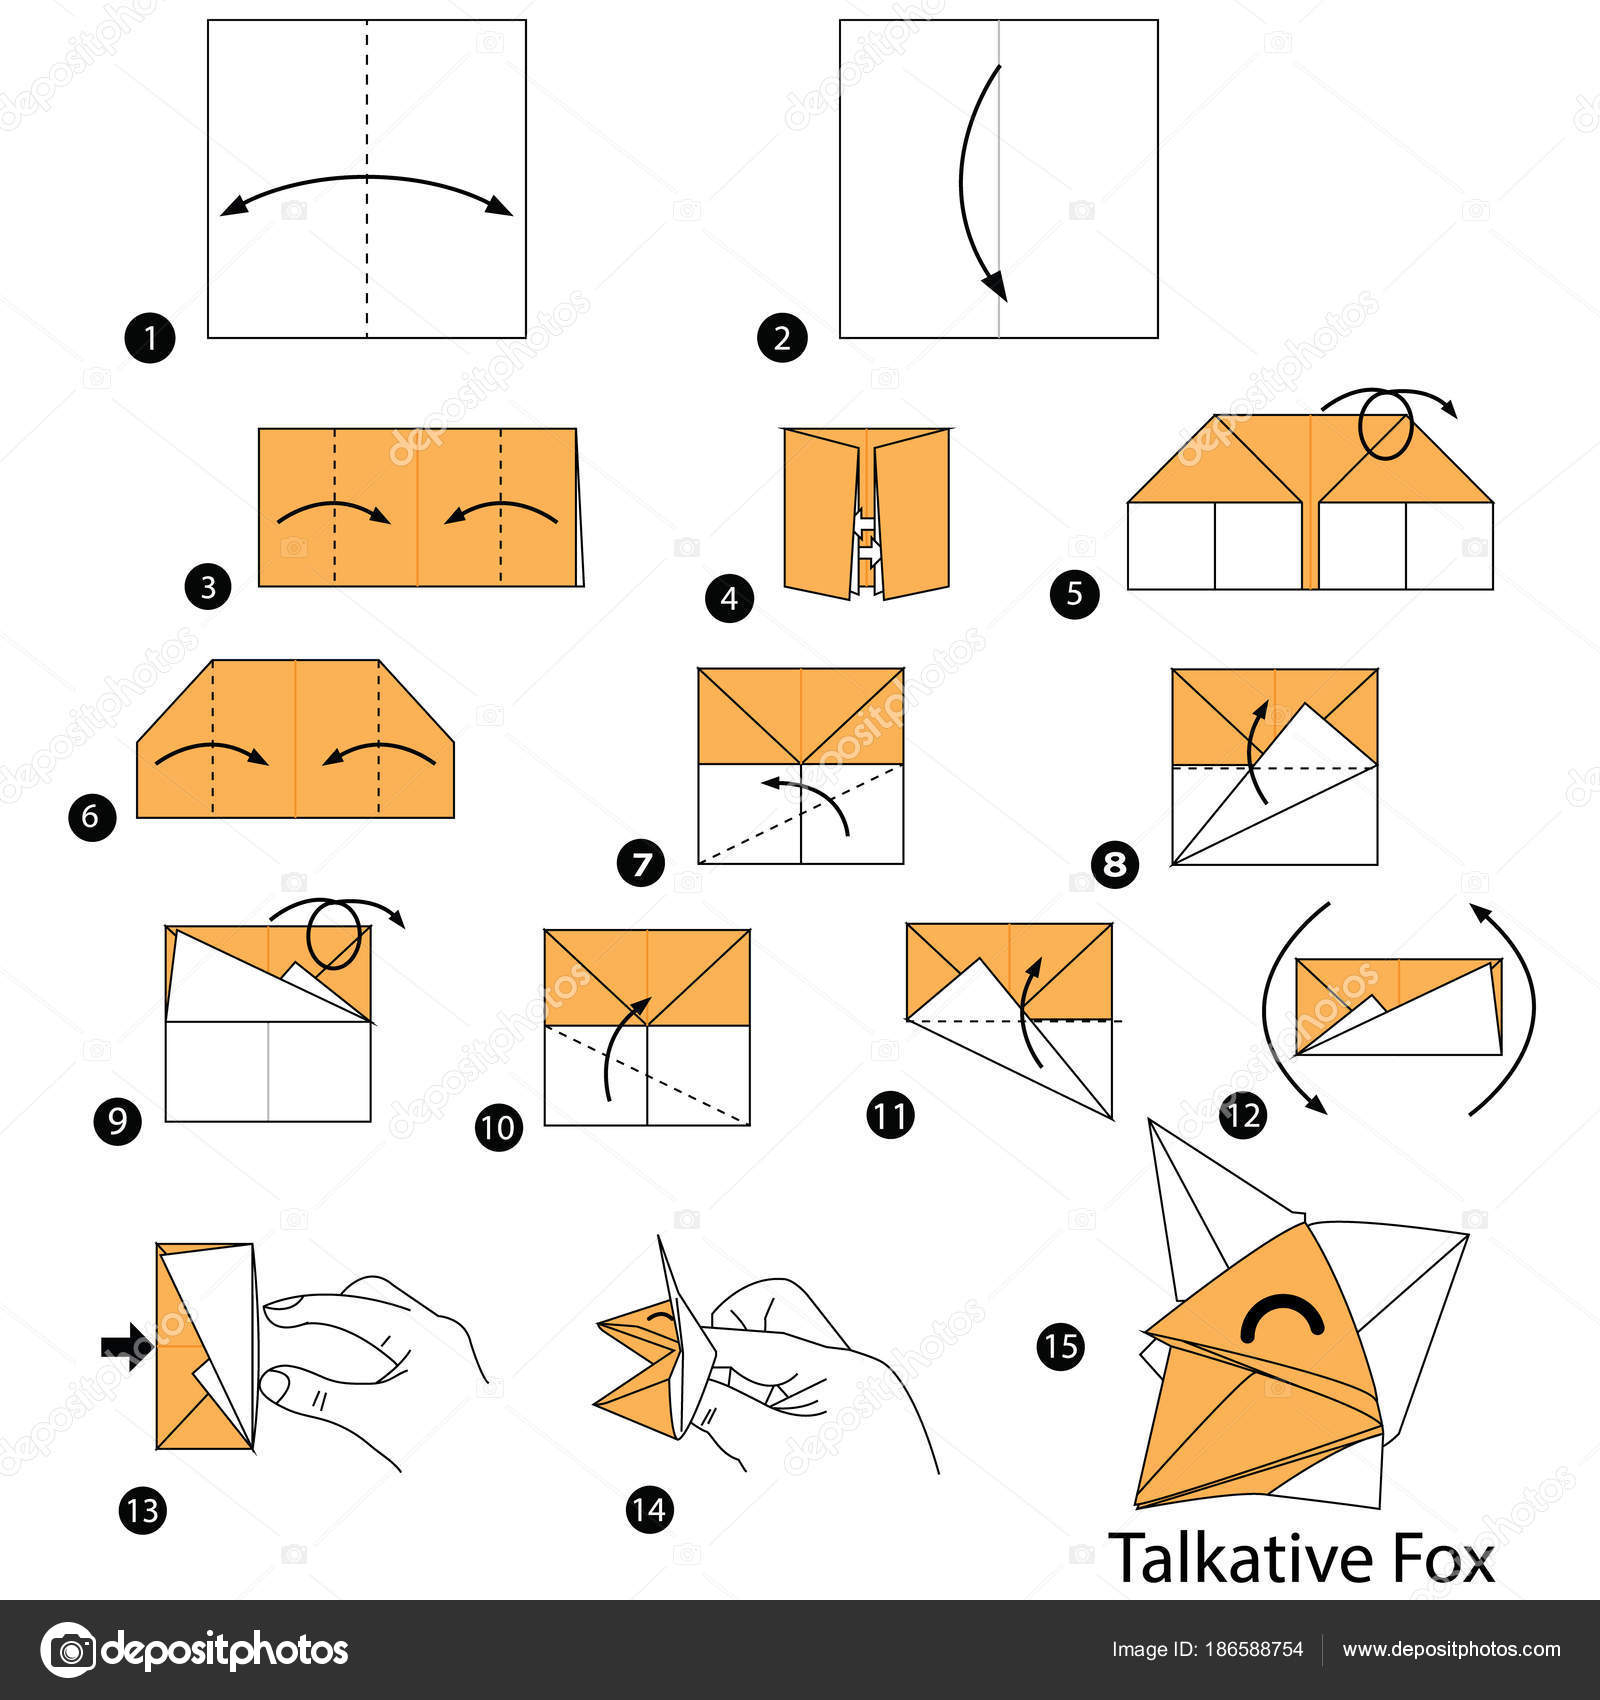 How To Make Origami Fox Step Step Instructions How Make Origami Talkative Fox Stock Vector